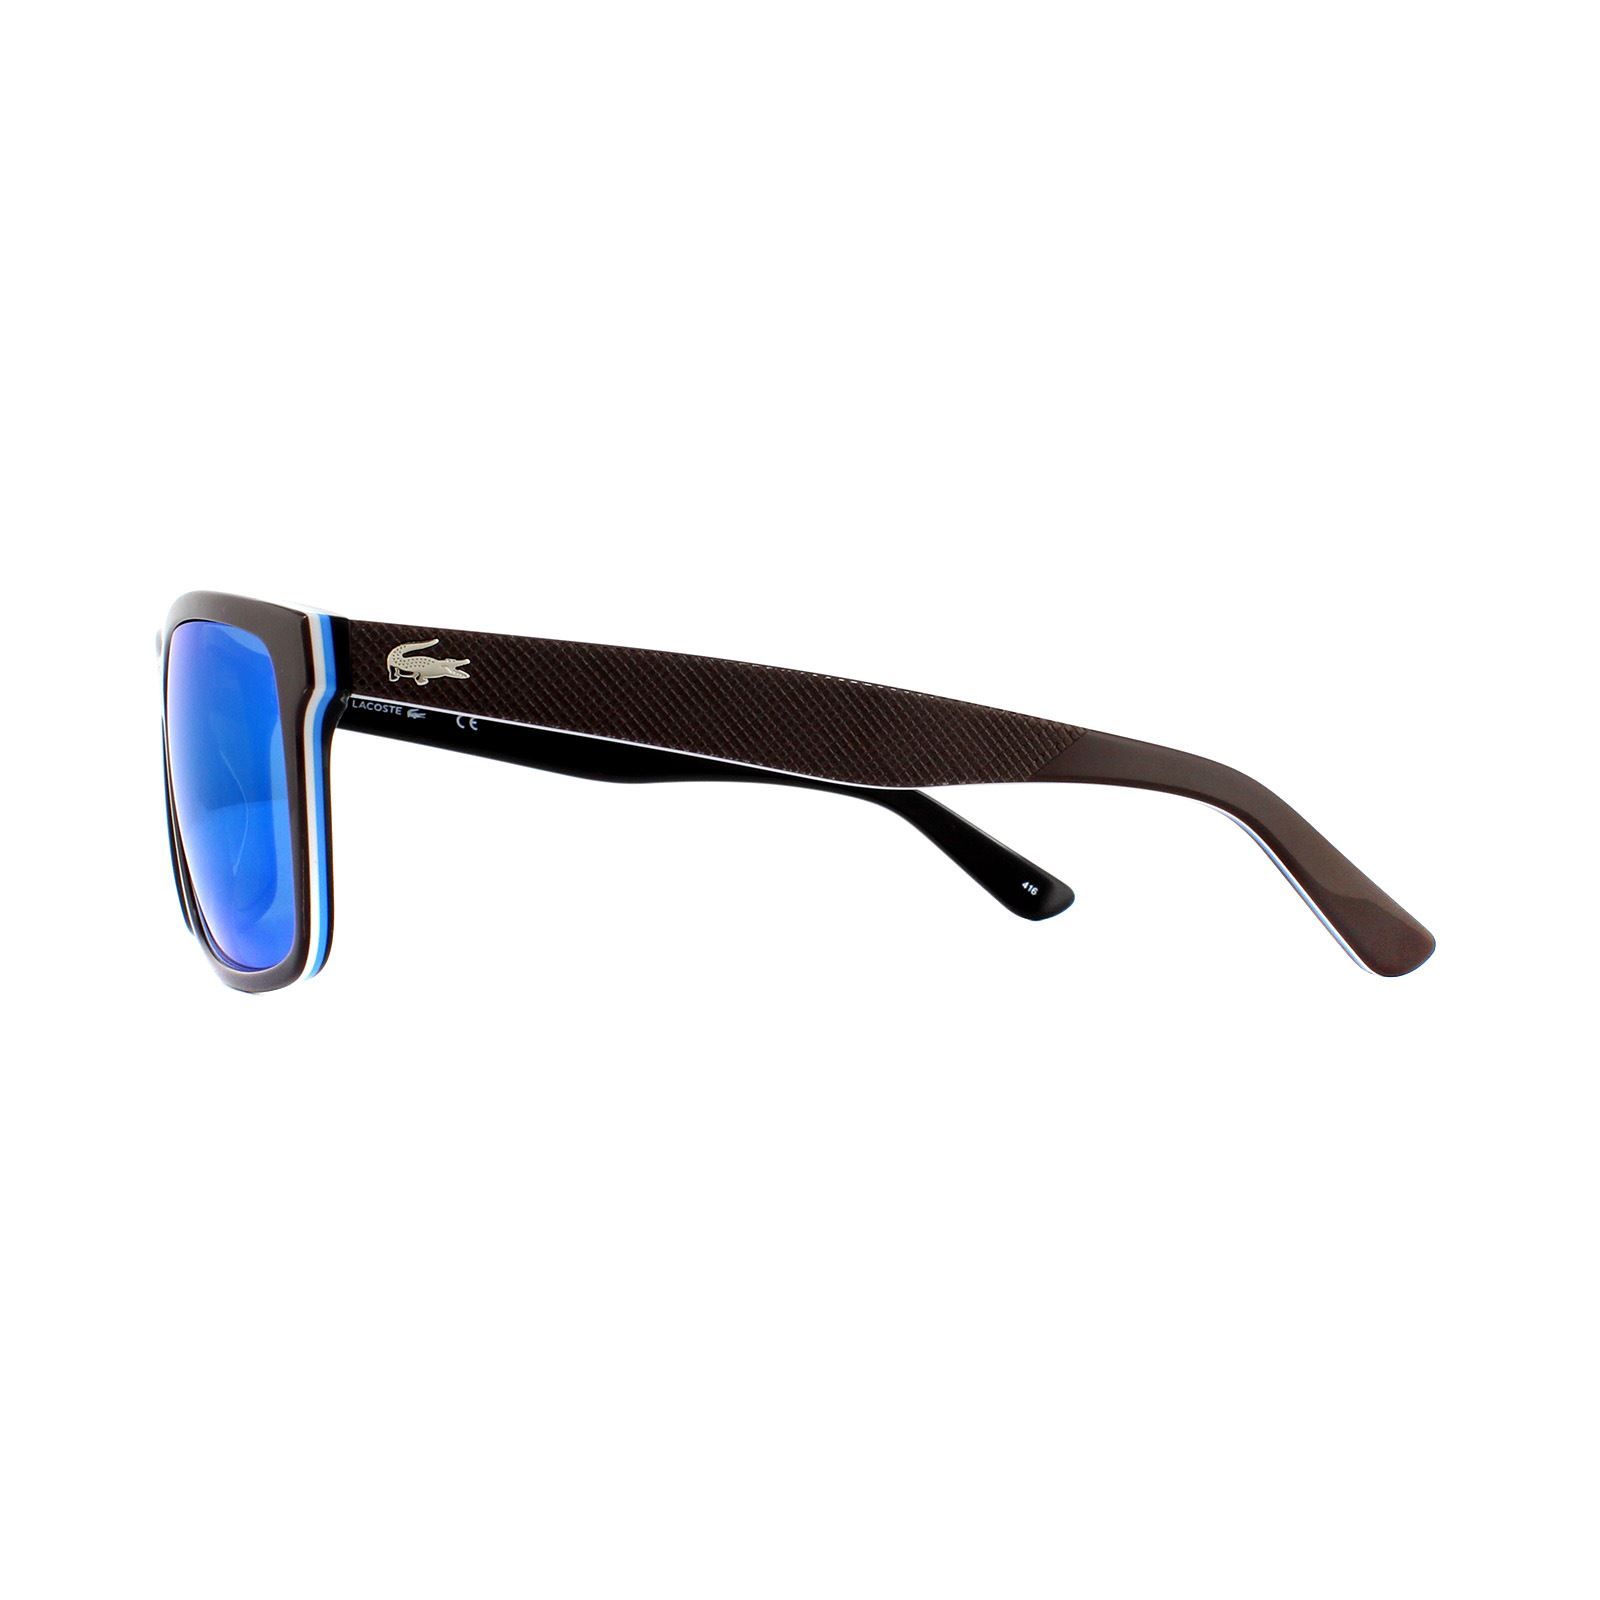 Lacoste Sunglasses L705S 234 Brown Blue Blue are a classic rectangular style with some nice touches of colour from Lacoste with the iconic alligator logo at the temples.